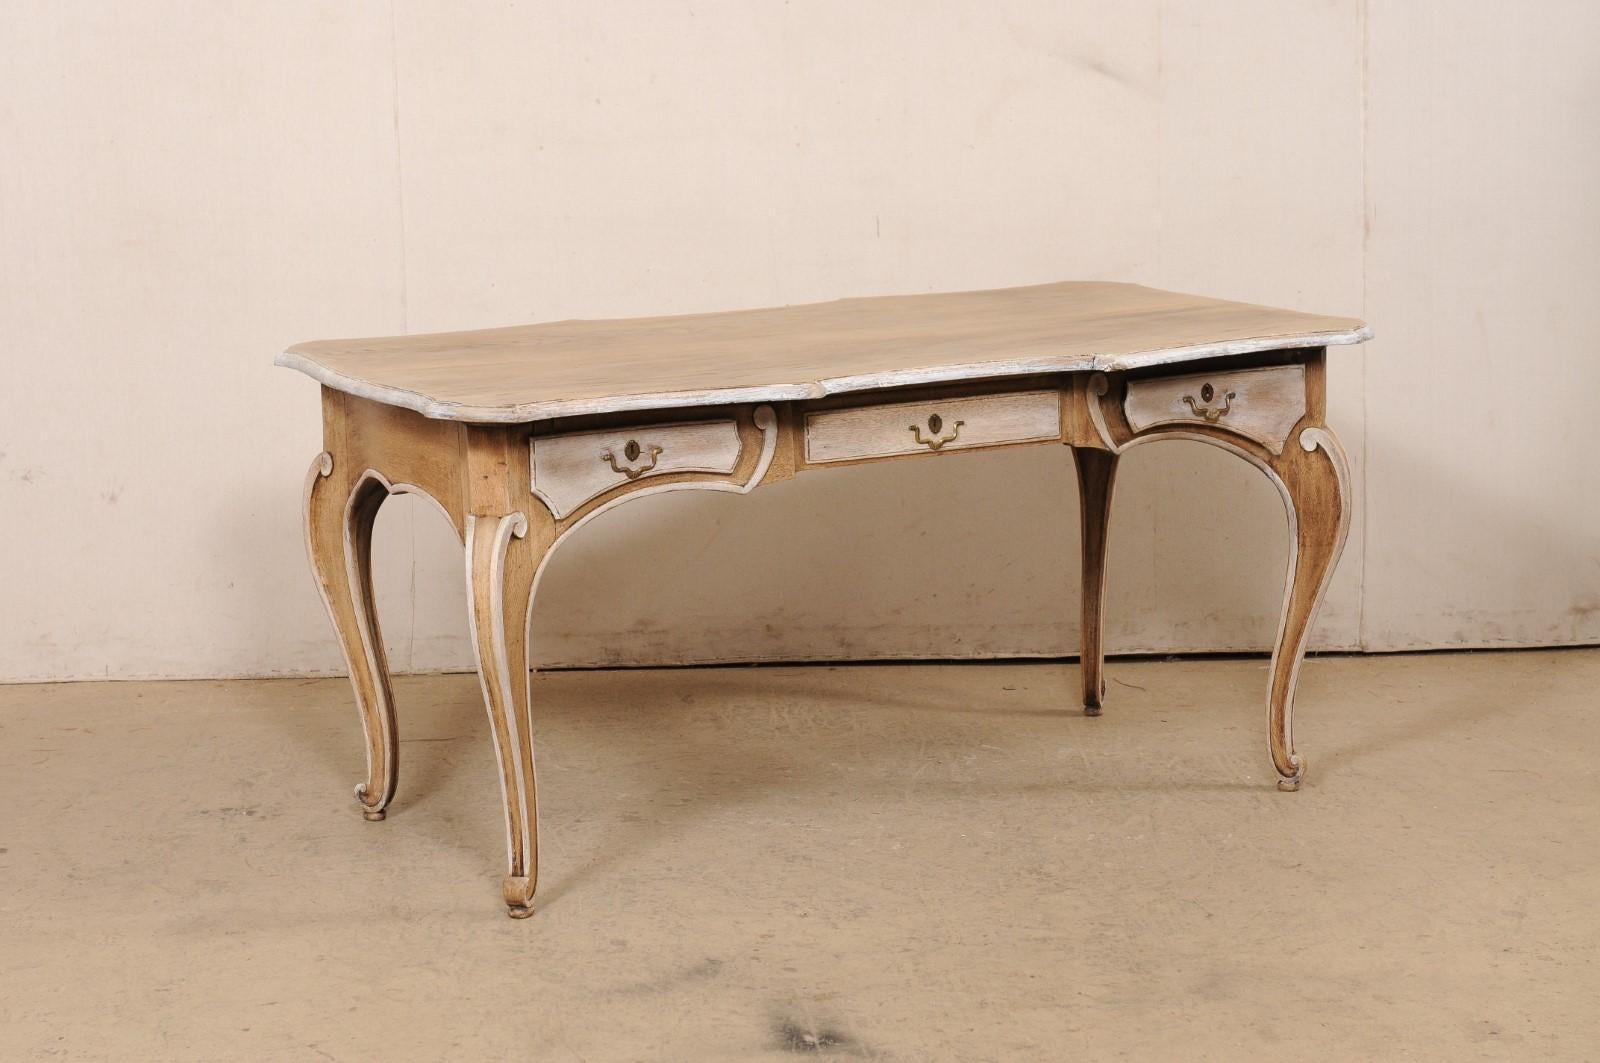 A French bleached-wood desk with three drawers. This vintage table from France features an overall rectangular shaped top which has been nicely emphasized with scallop-carved edges about all four sides, giving this piece a shapely and fluid design